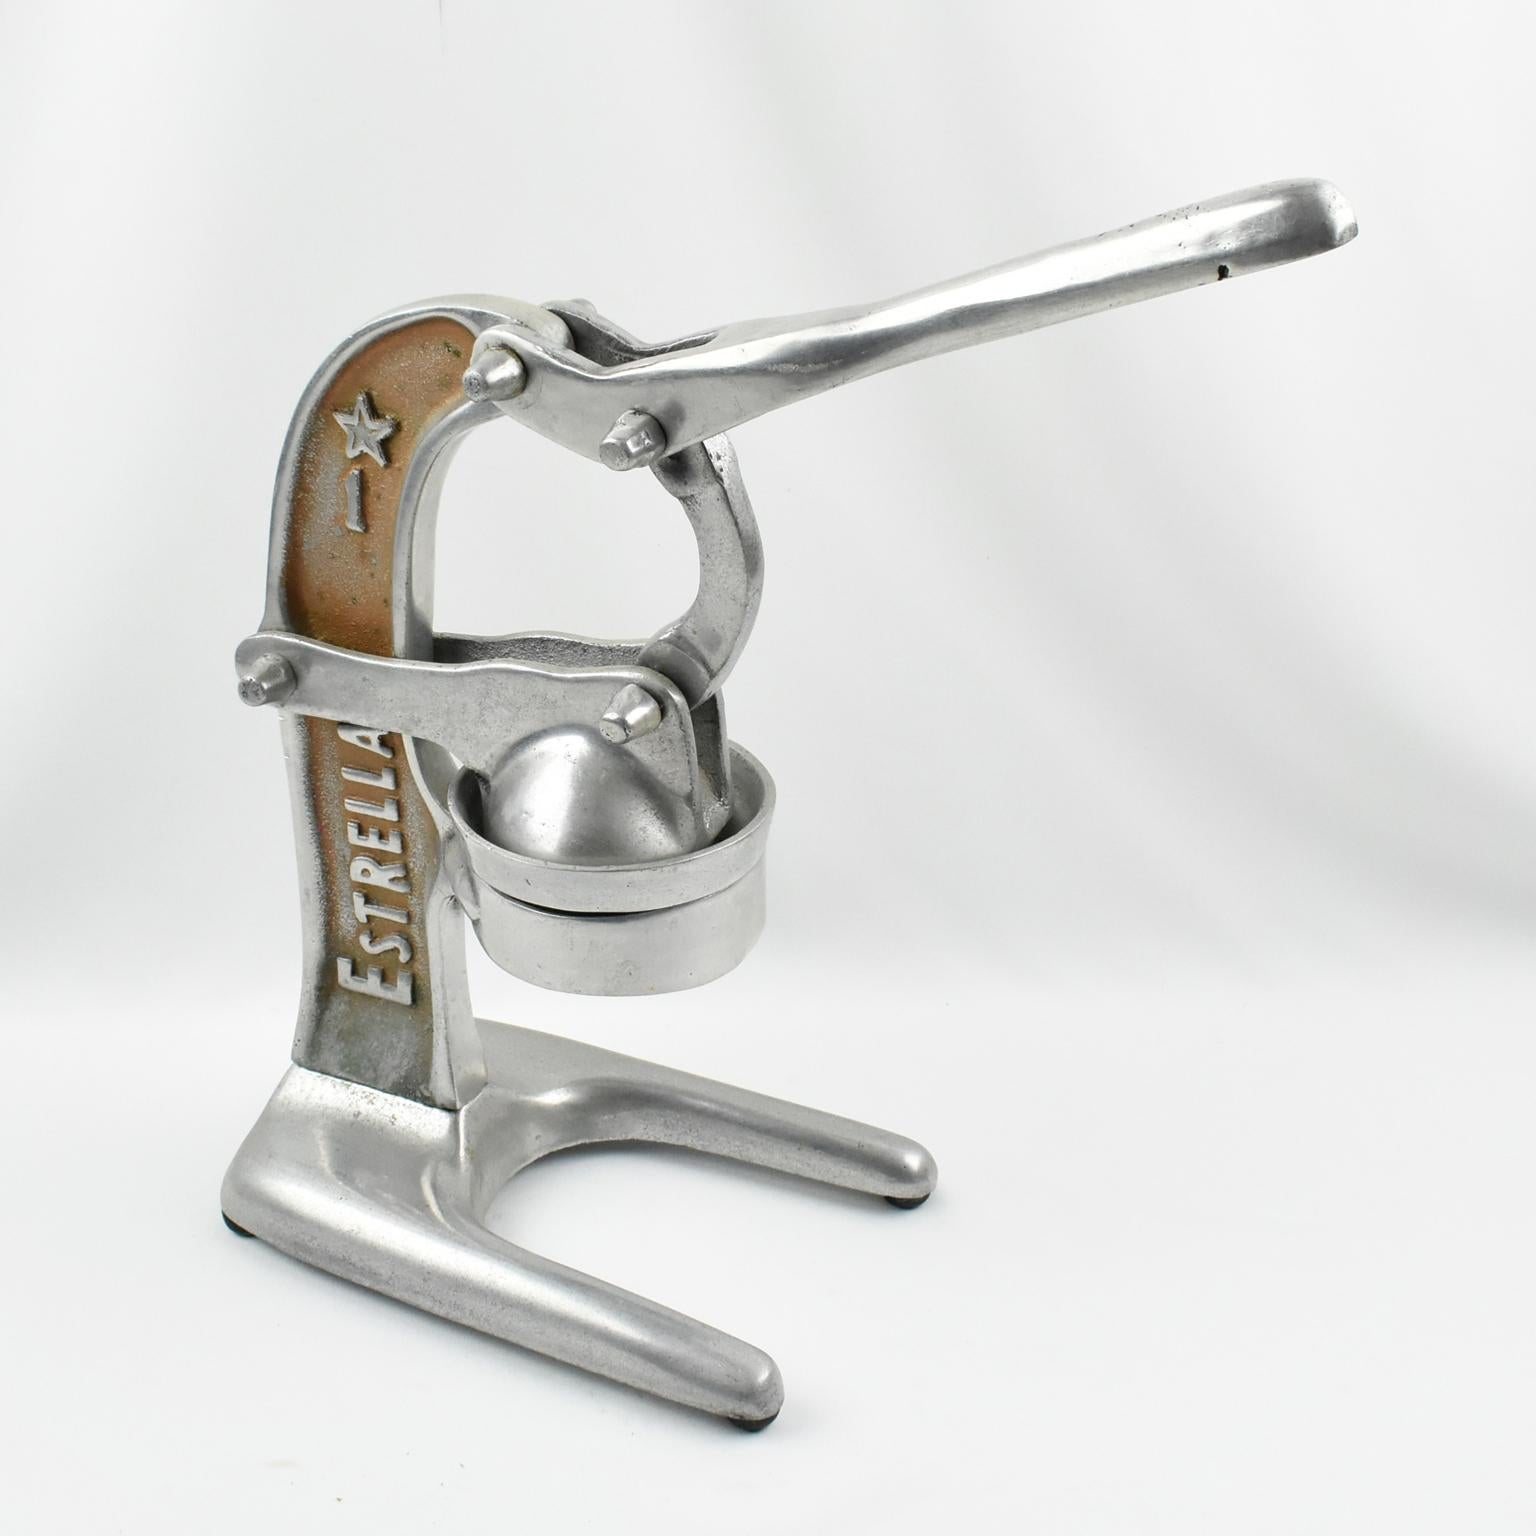 So cool 1940s lemon squeezer or juicer. Heavy duty mechanical barware tool, that almost looks like a torture machine!
Industrial tabletop citrus press was used in Cafes and Restaurants in France, made of cast aluminum, the entire piece is ready to